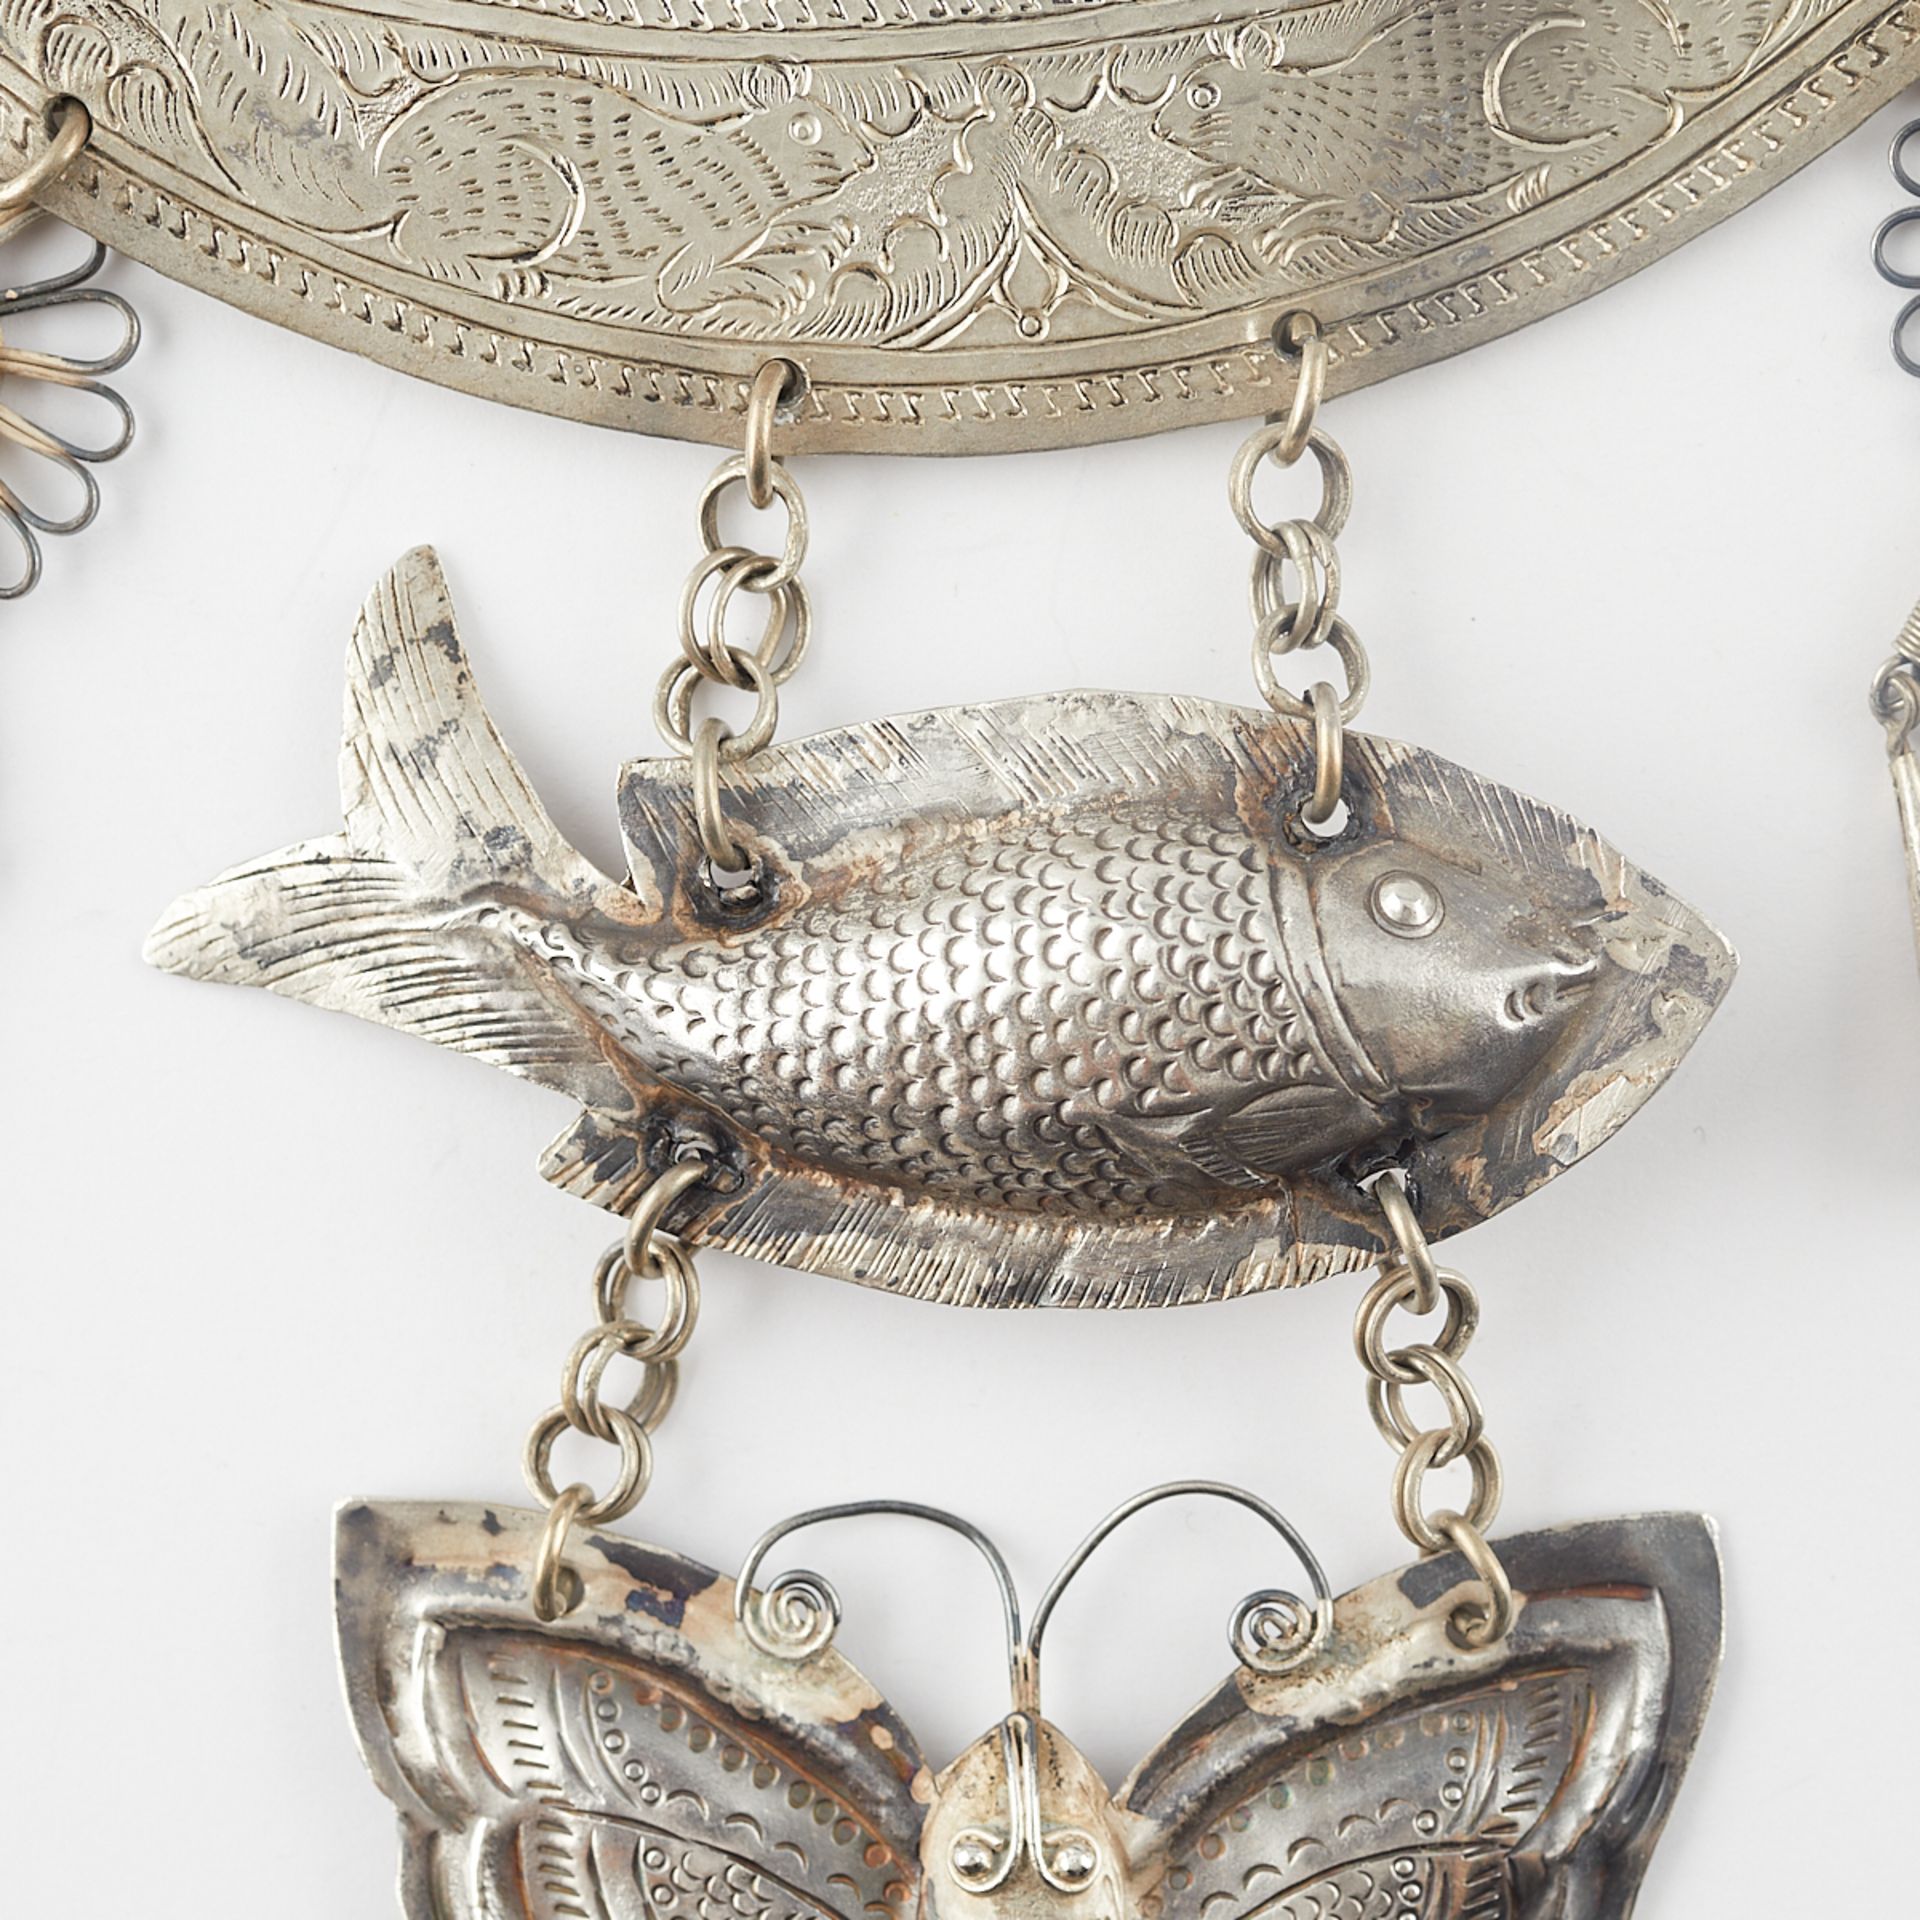 Hmong Silver Butterfly & Fish Necklace - Image 4 of 6